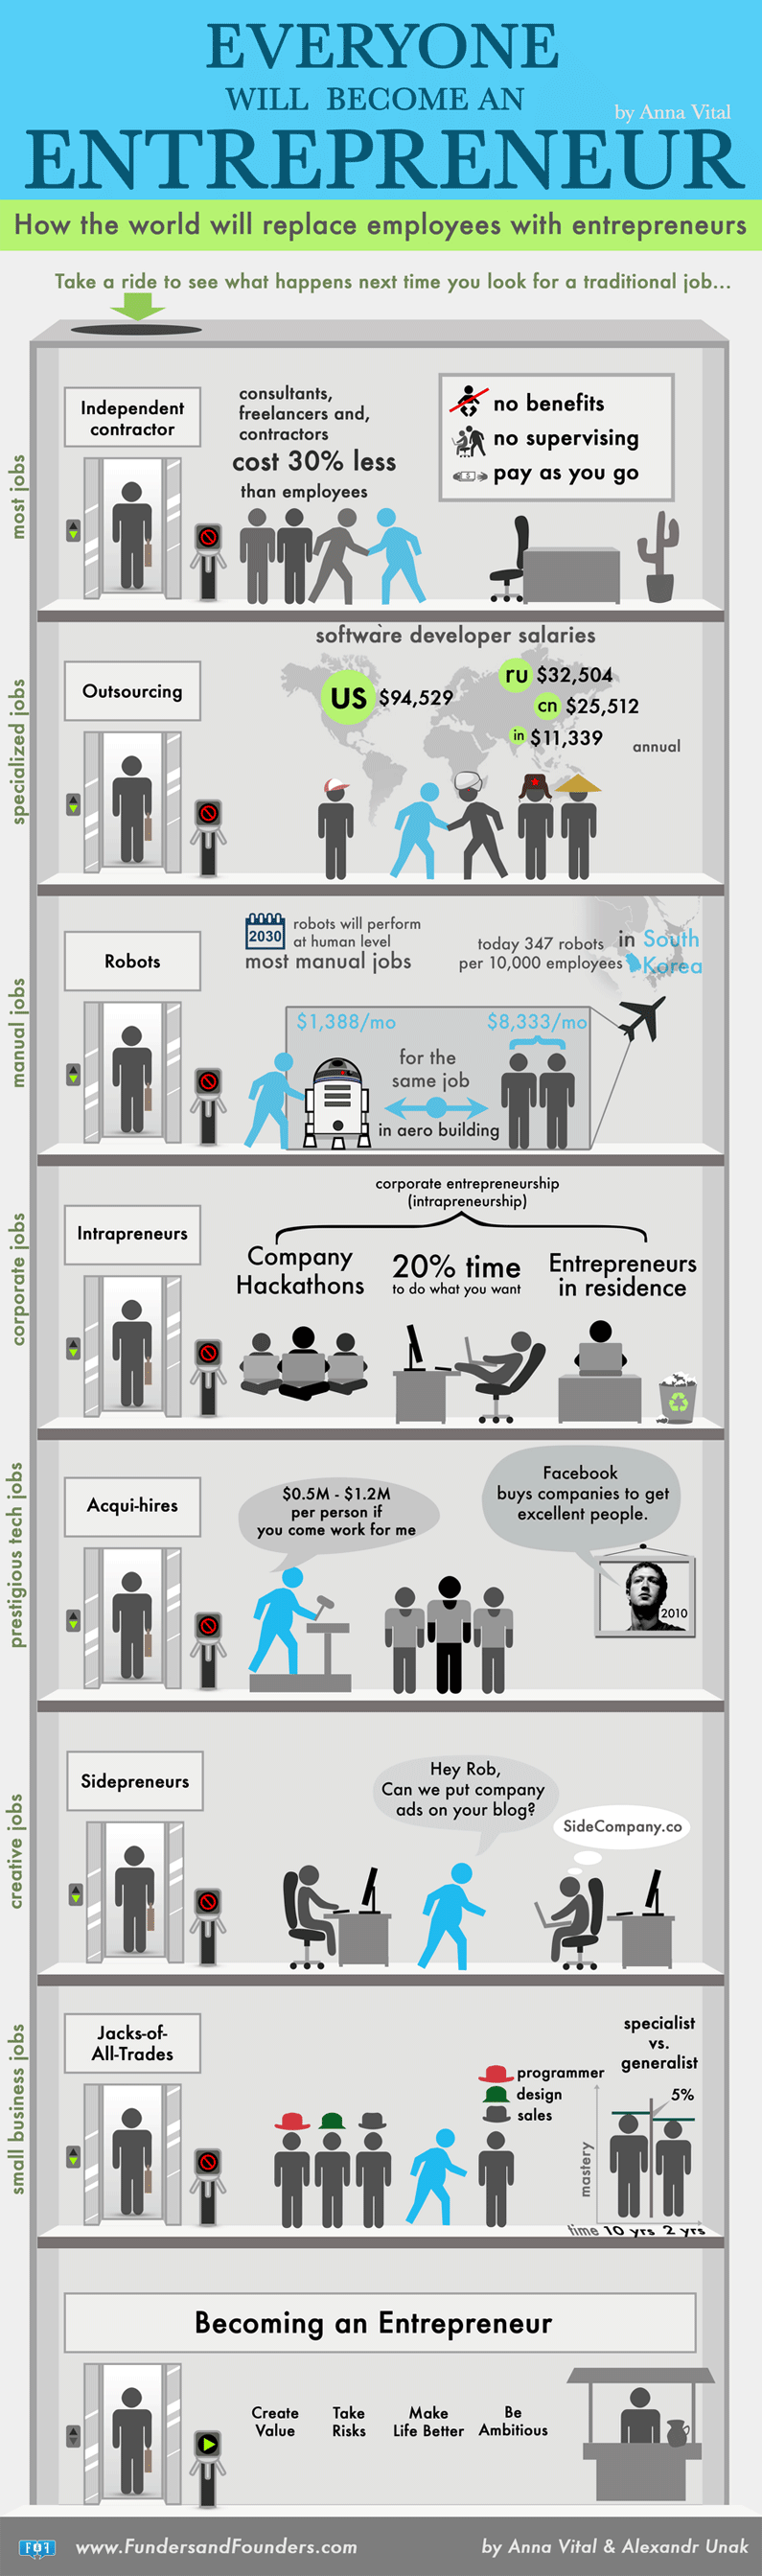 Infographic: Everyone will become an entrepreneur